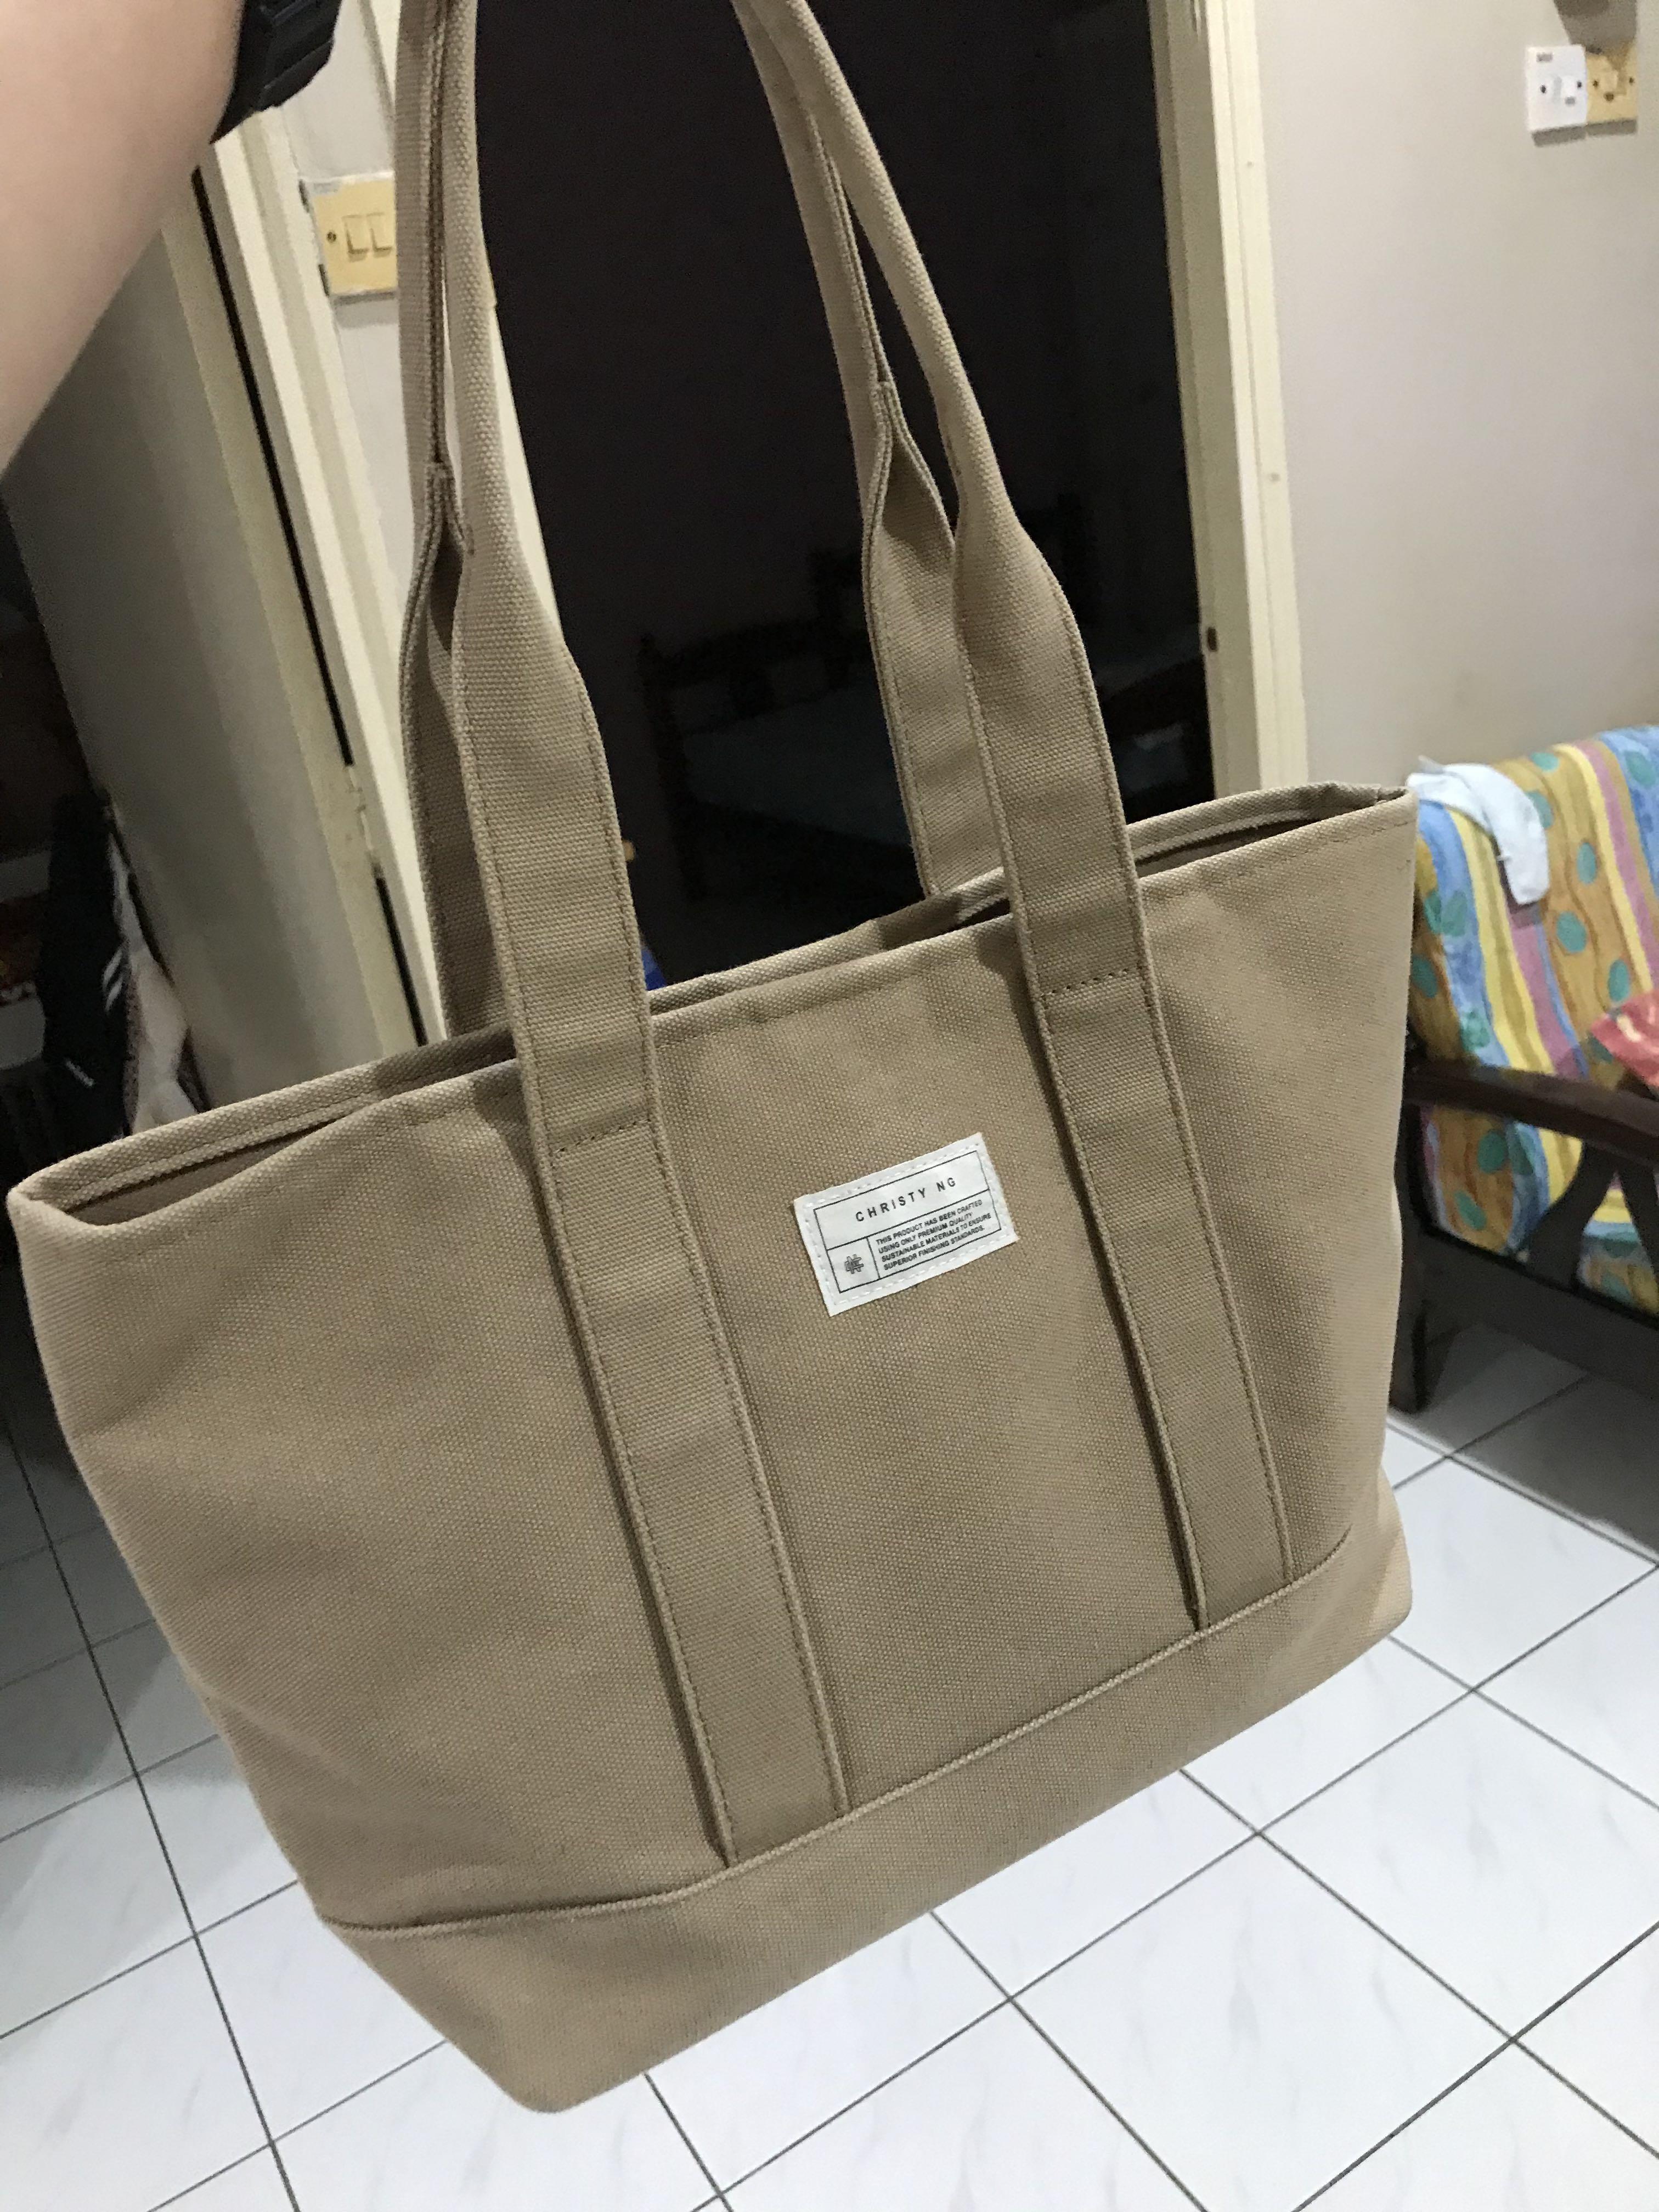 unboxing BERLIN CANVAS TOTE BAG from CHRISTY NG 